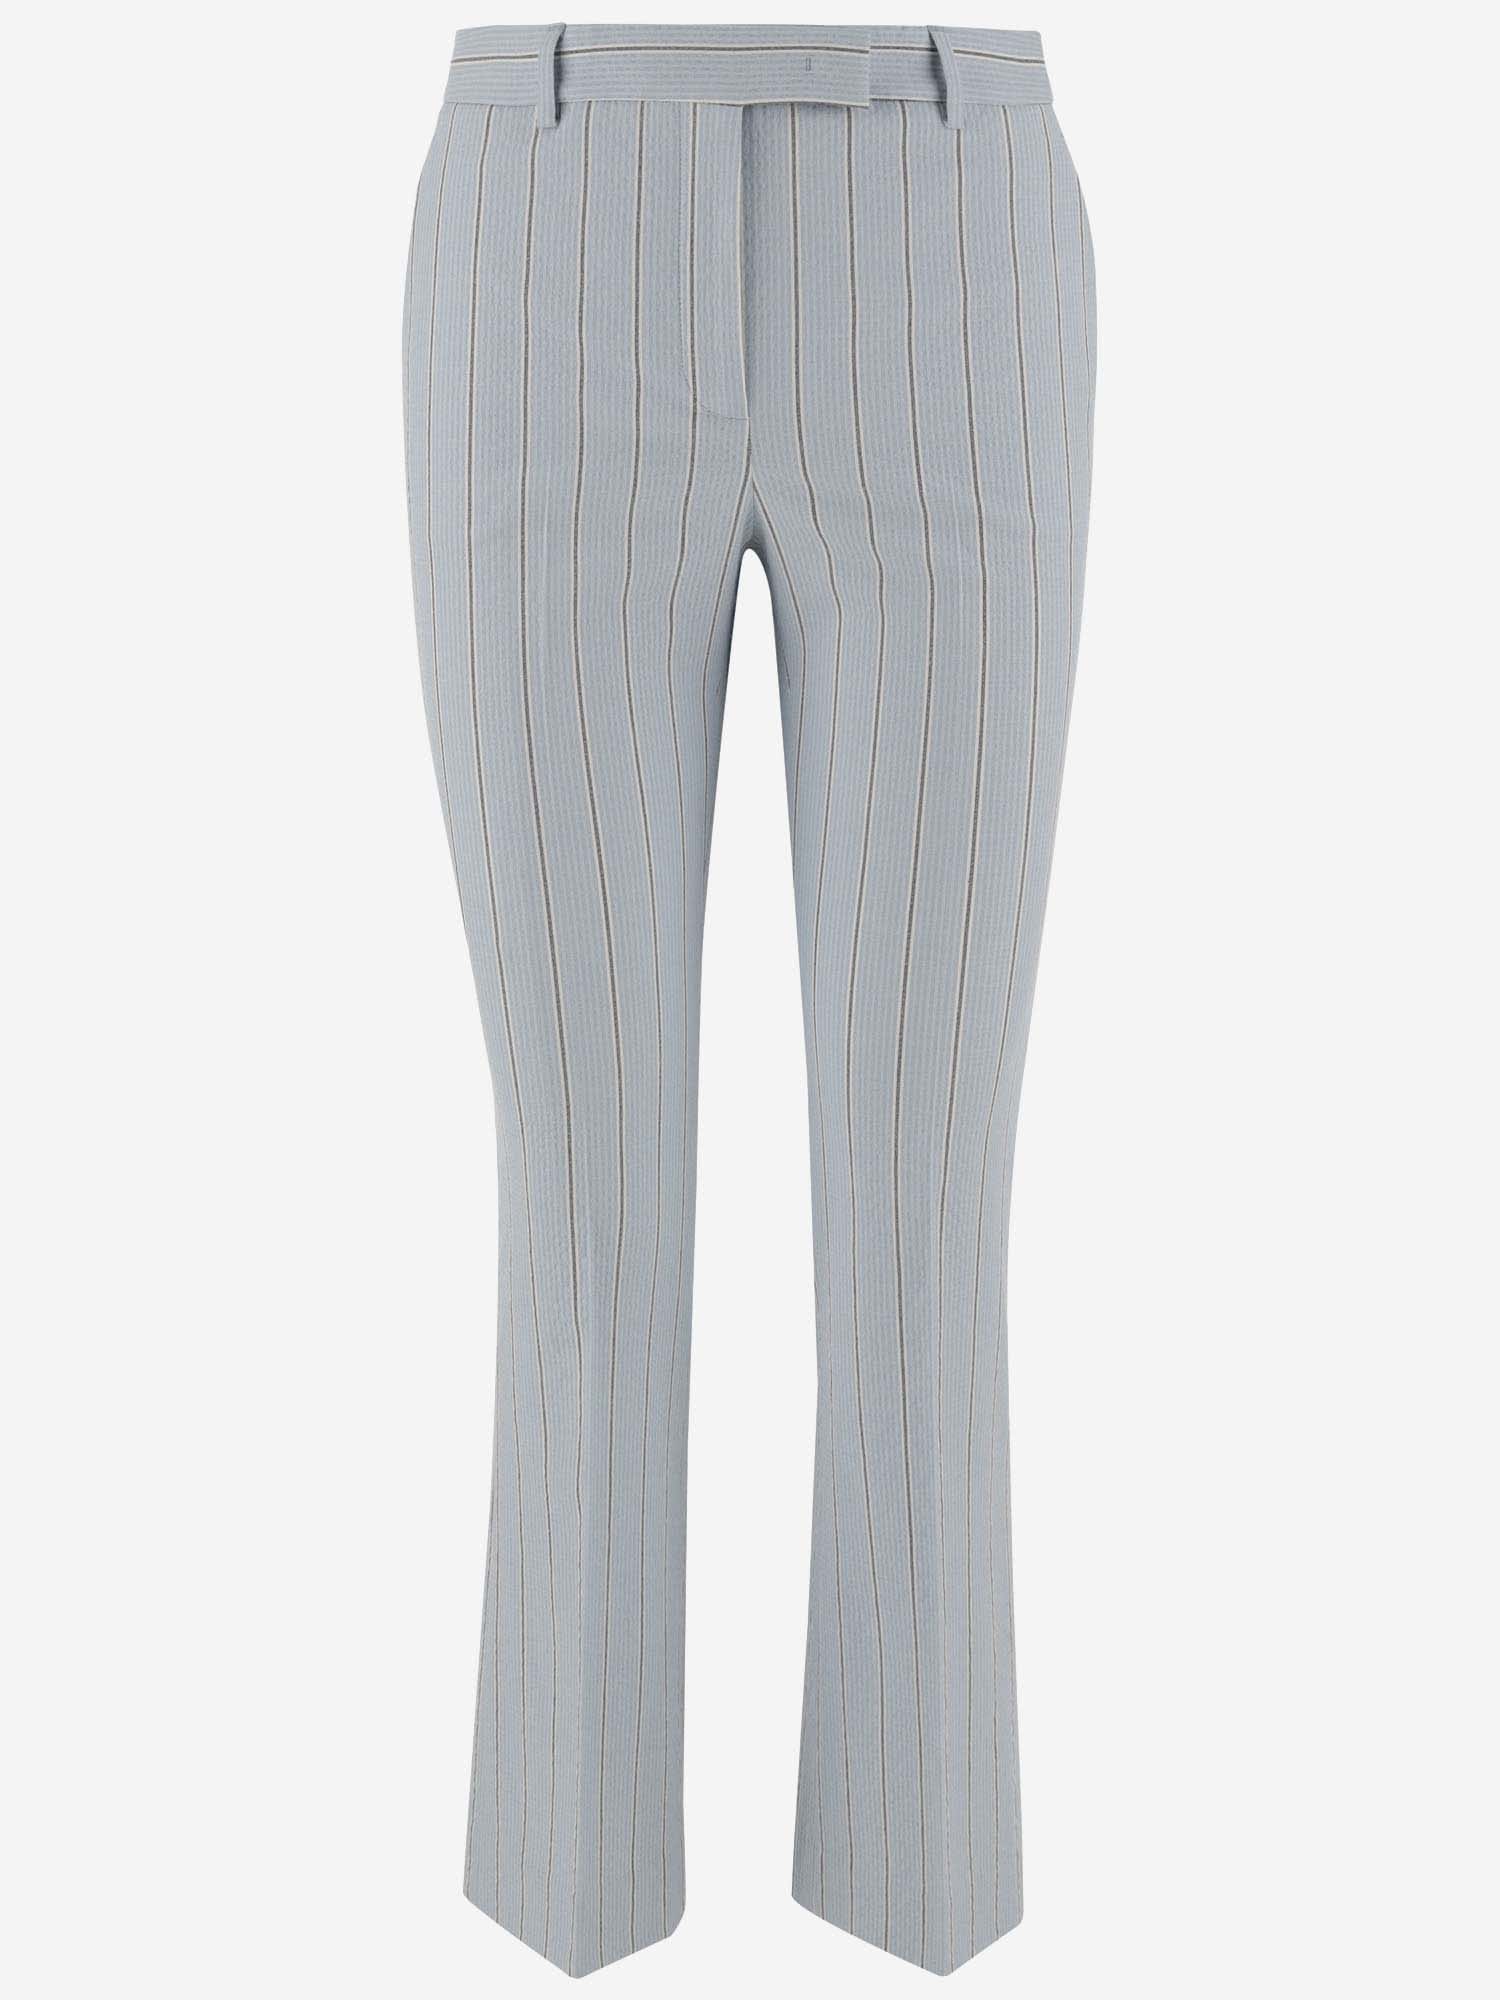 Ql2 Cotton Blend Pants With Striped Pattern In Grey